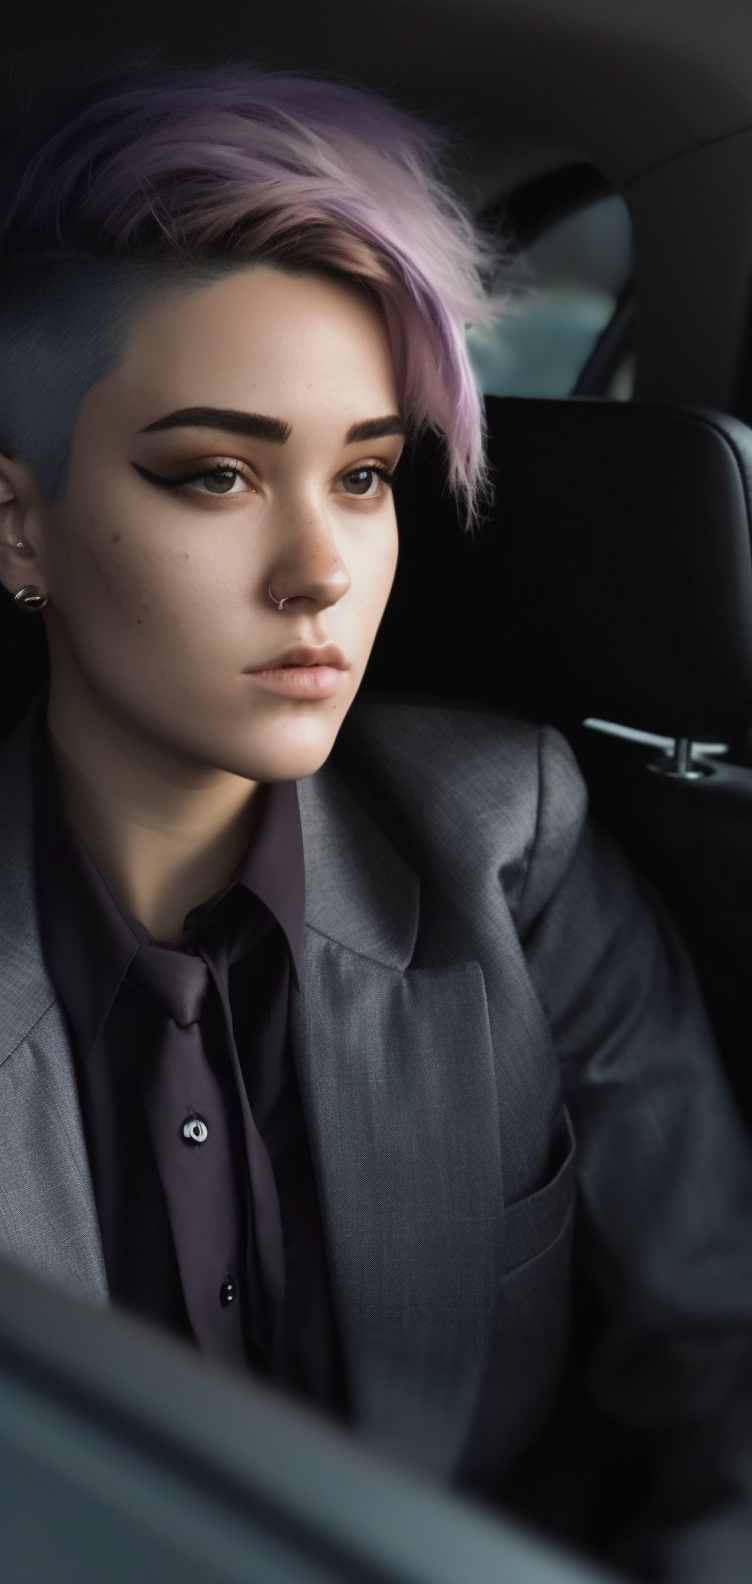 Jen_Palmer_woman_with_purple_hair_sitting_in_a_car_in_the_style_b756a971-1d7e-4972-8e86-46513ad1ca73.png